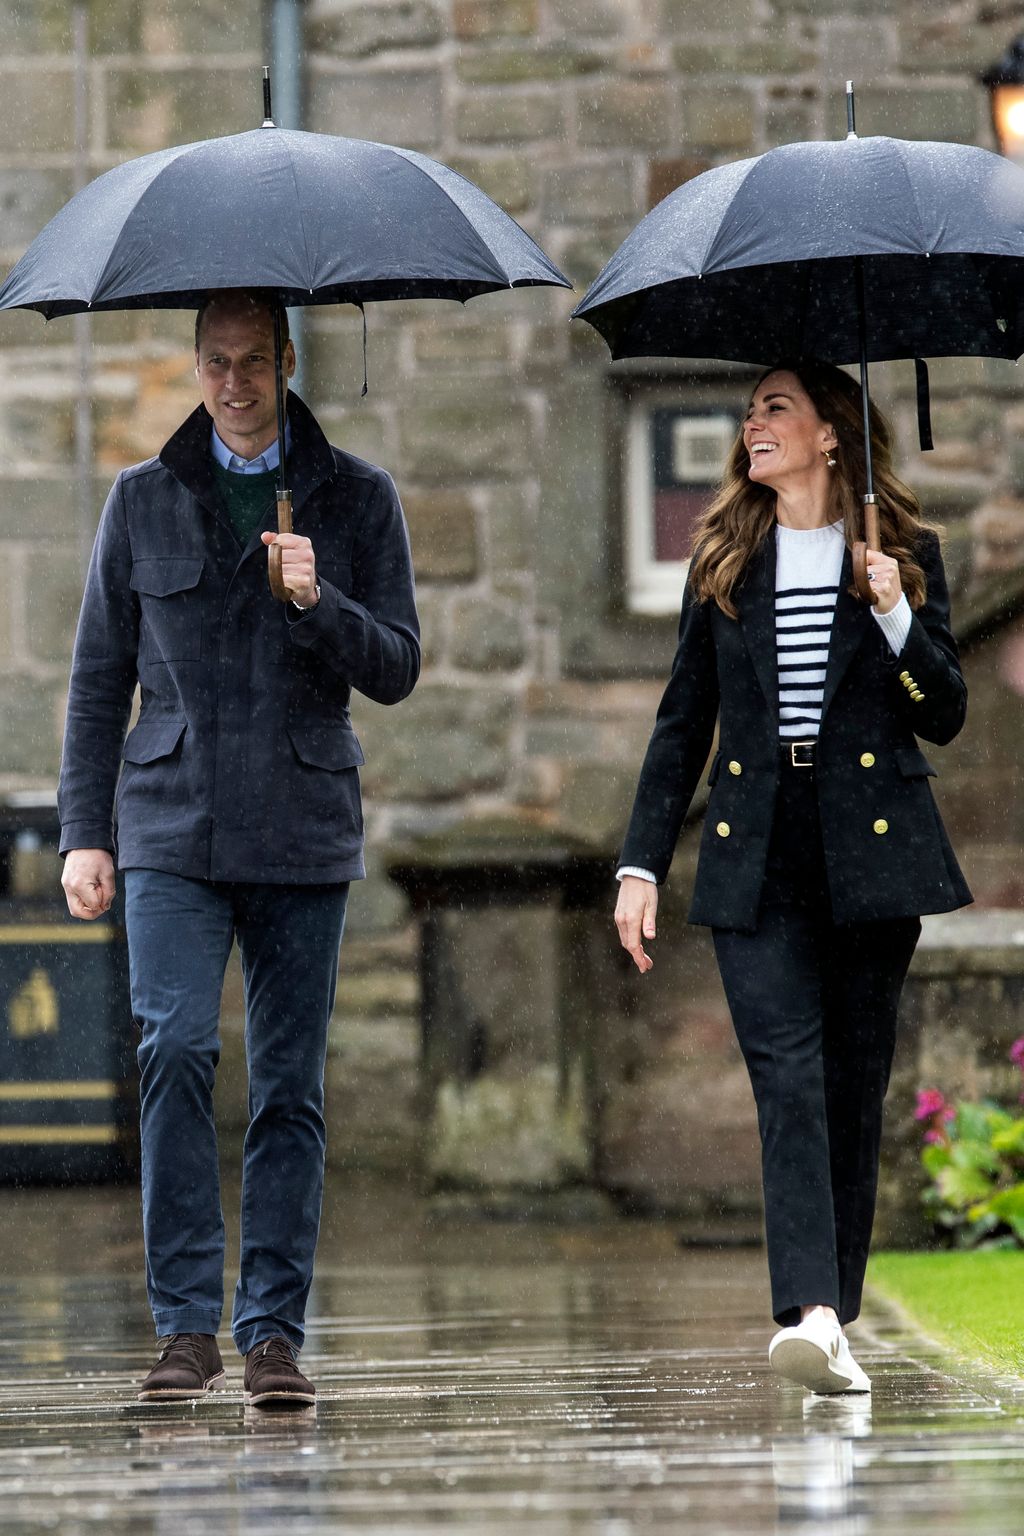 Prince William, Duke of Cambridge and Catherine, Duchess of Cambridge during a visit to the University of St Andrews